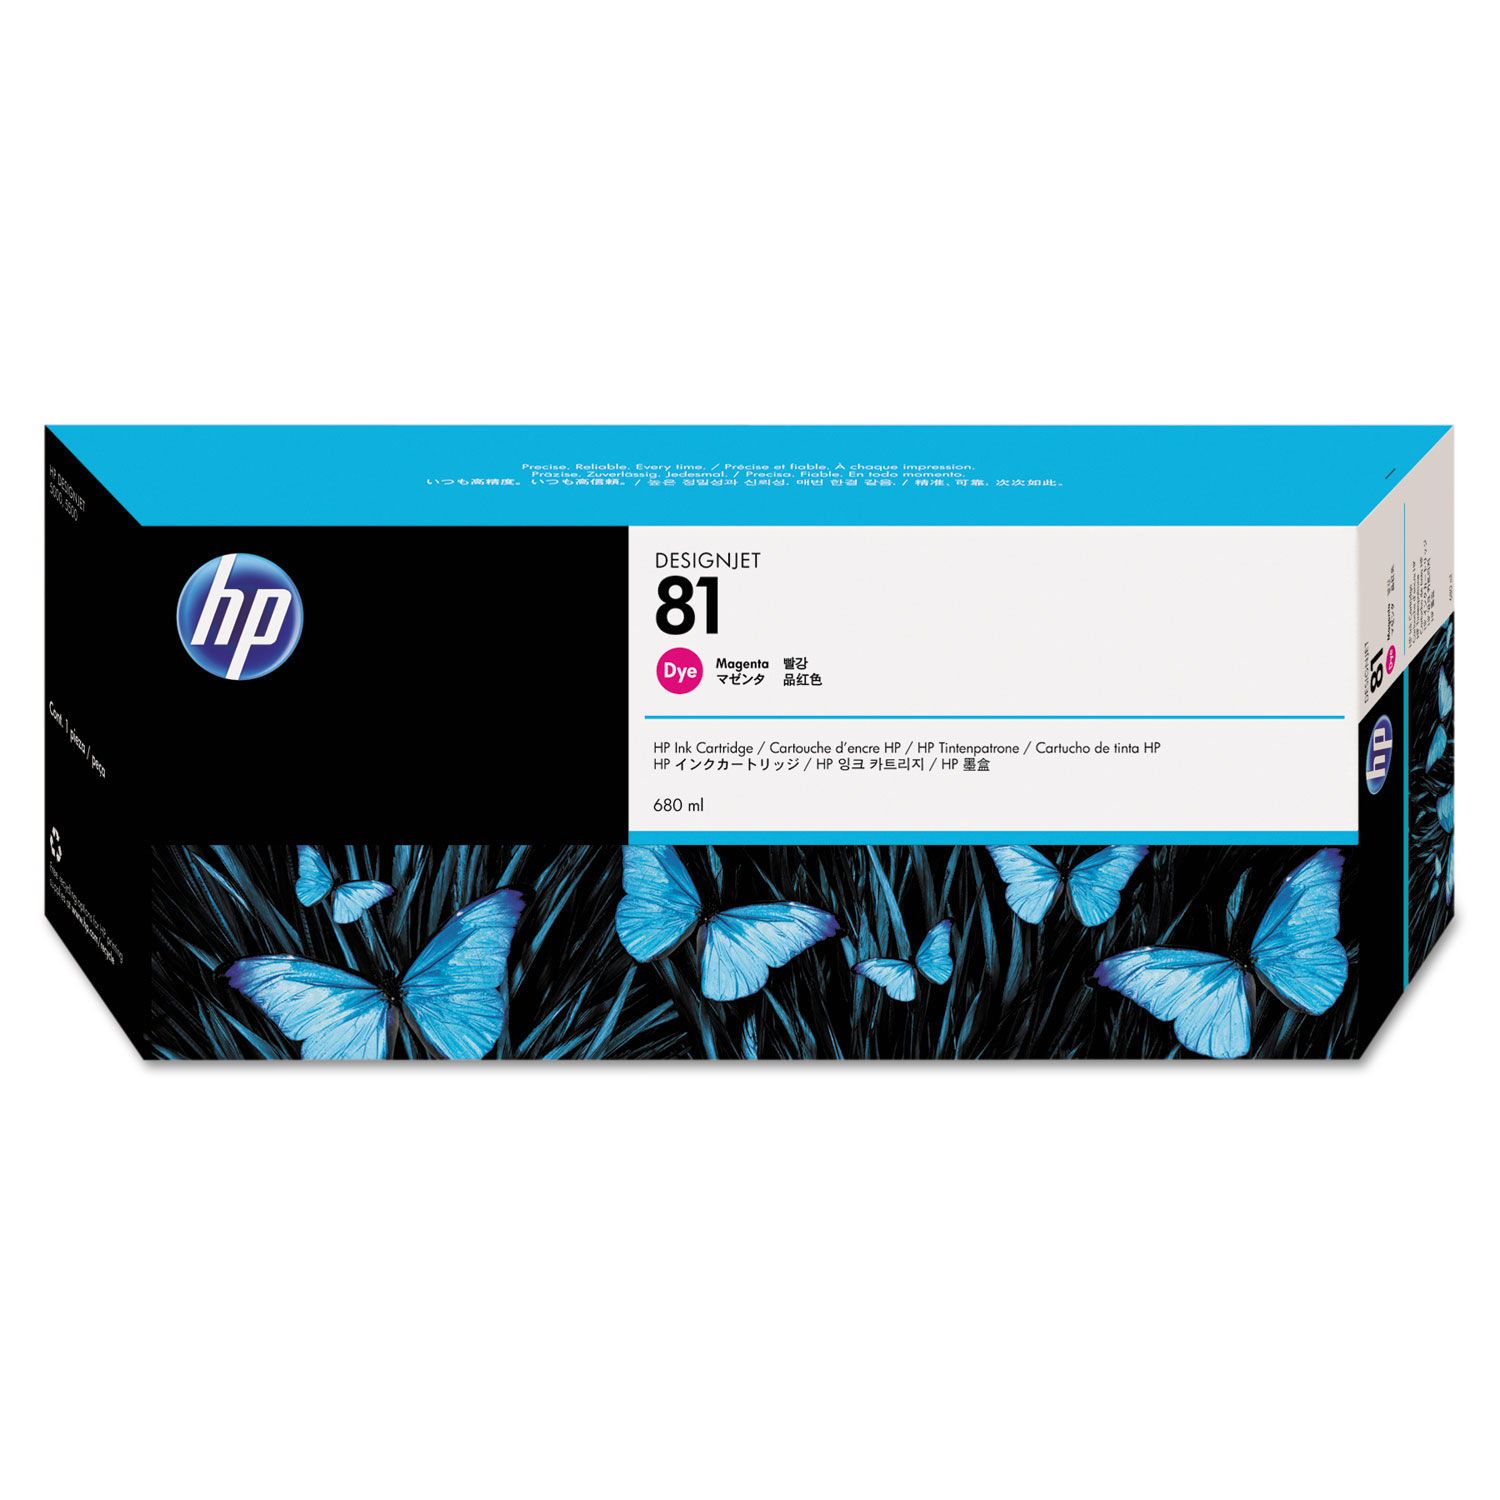 Related to HP DESIGNJET 5500PS: C4932A